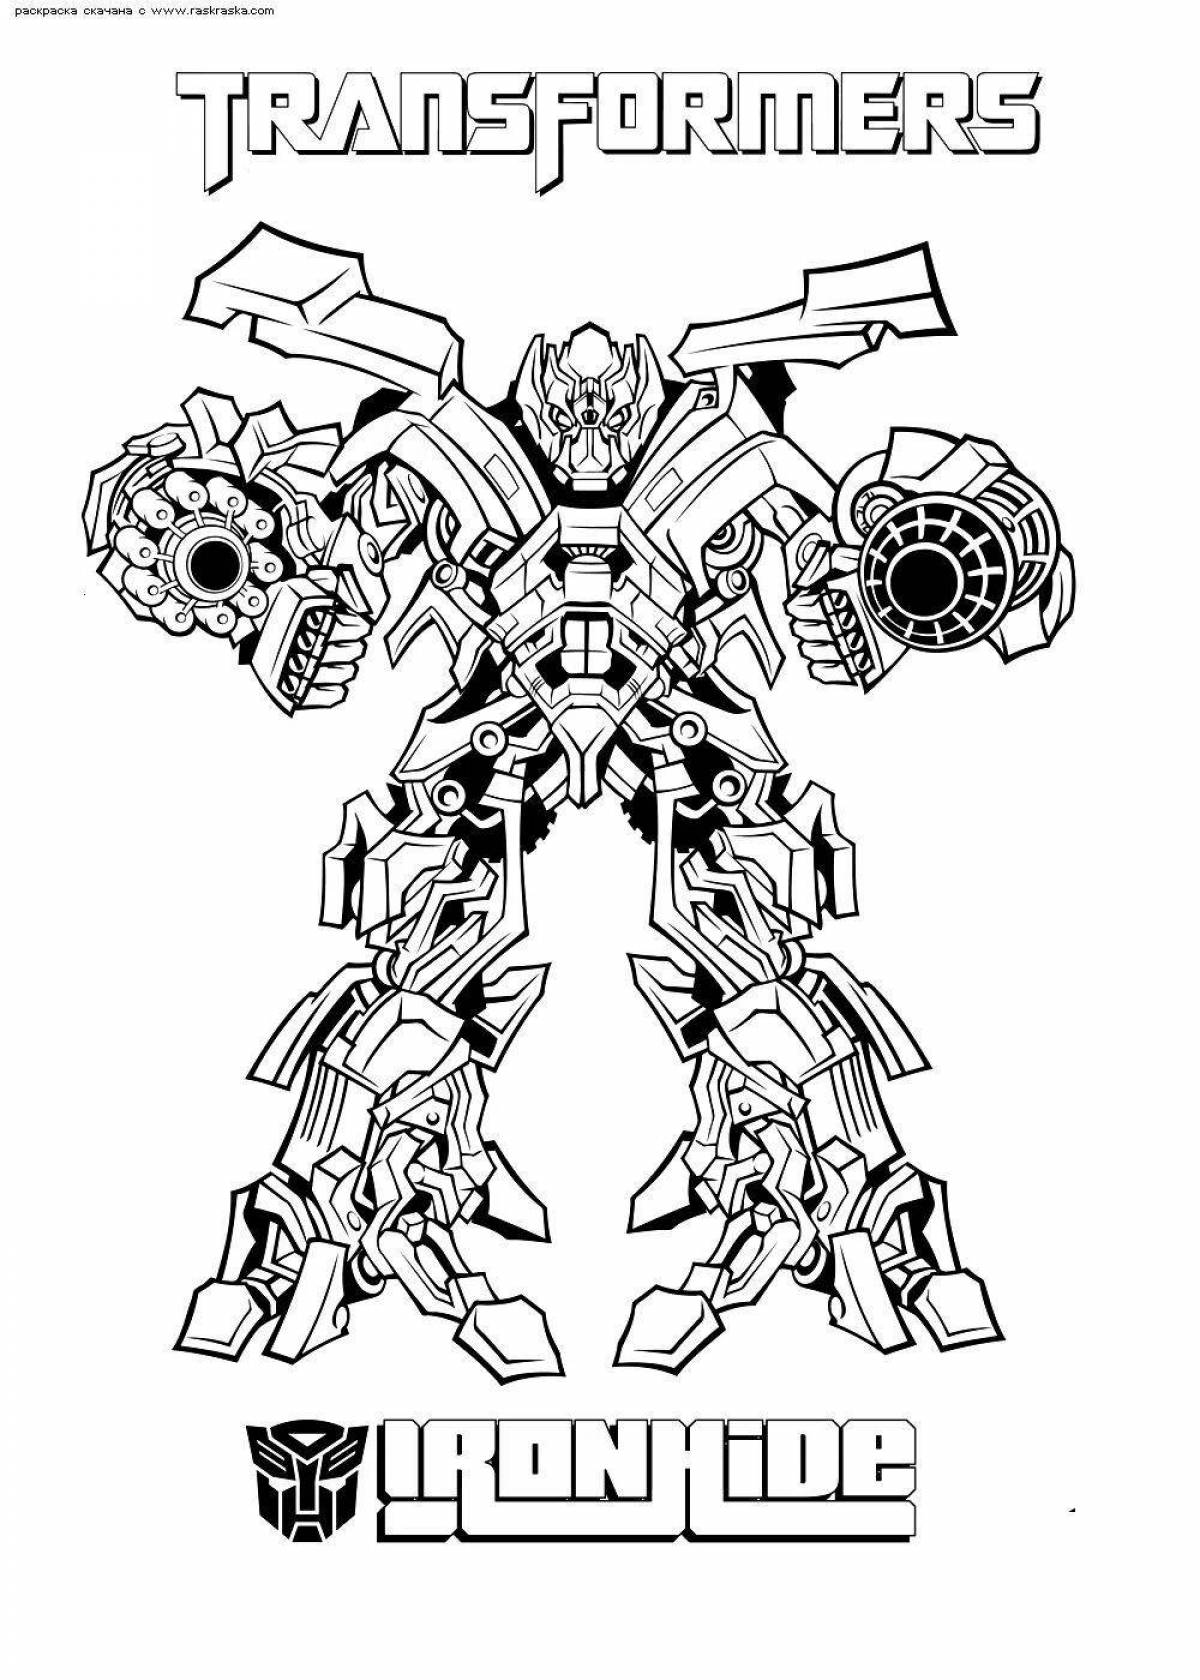 Outstanding transformers ratchet coloring page